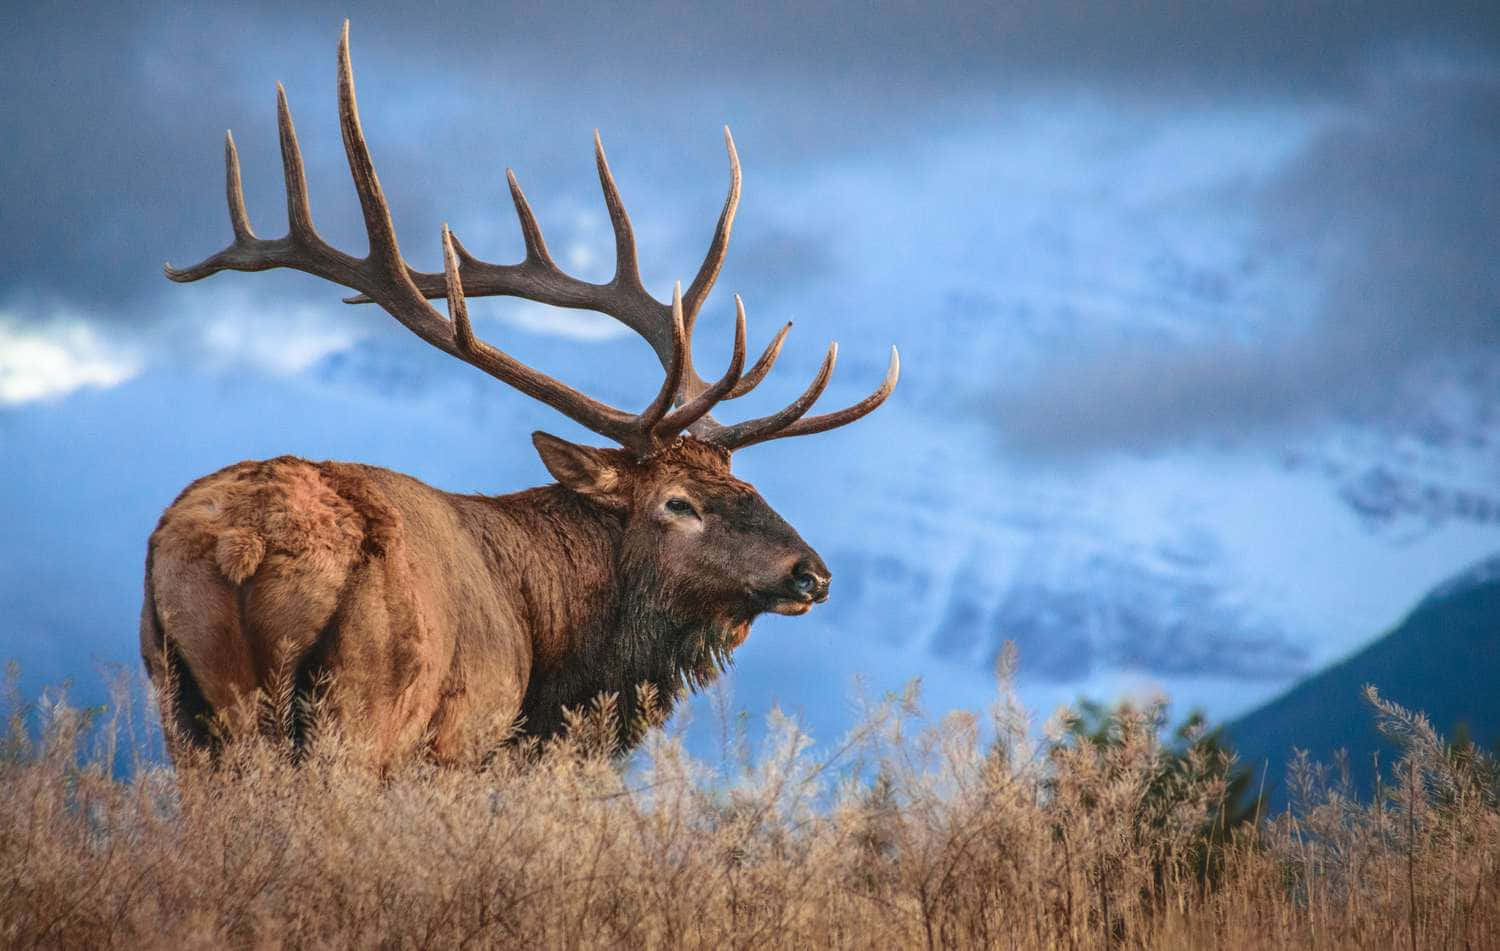 A majestic elk standing in a picturesque meadow